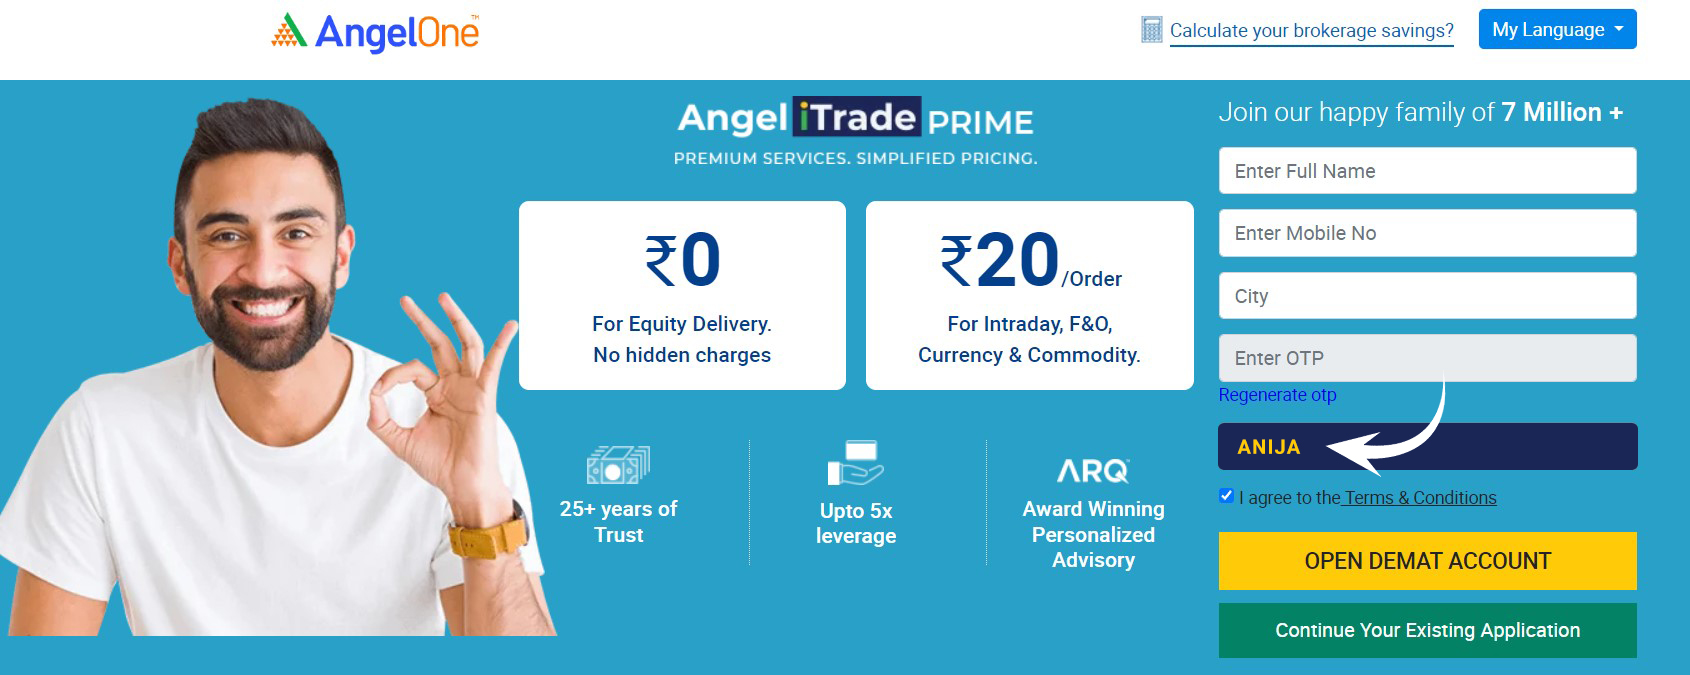 Use GoPaisa Angel Broking referral code “ANIJA” or download GoPaisa app to get lucrative offers on signup.